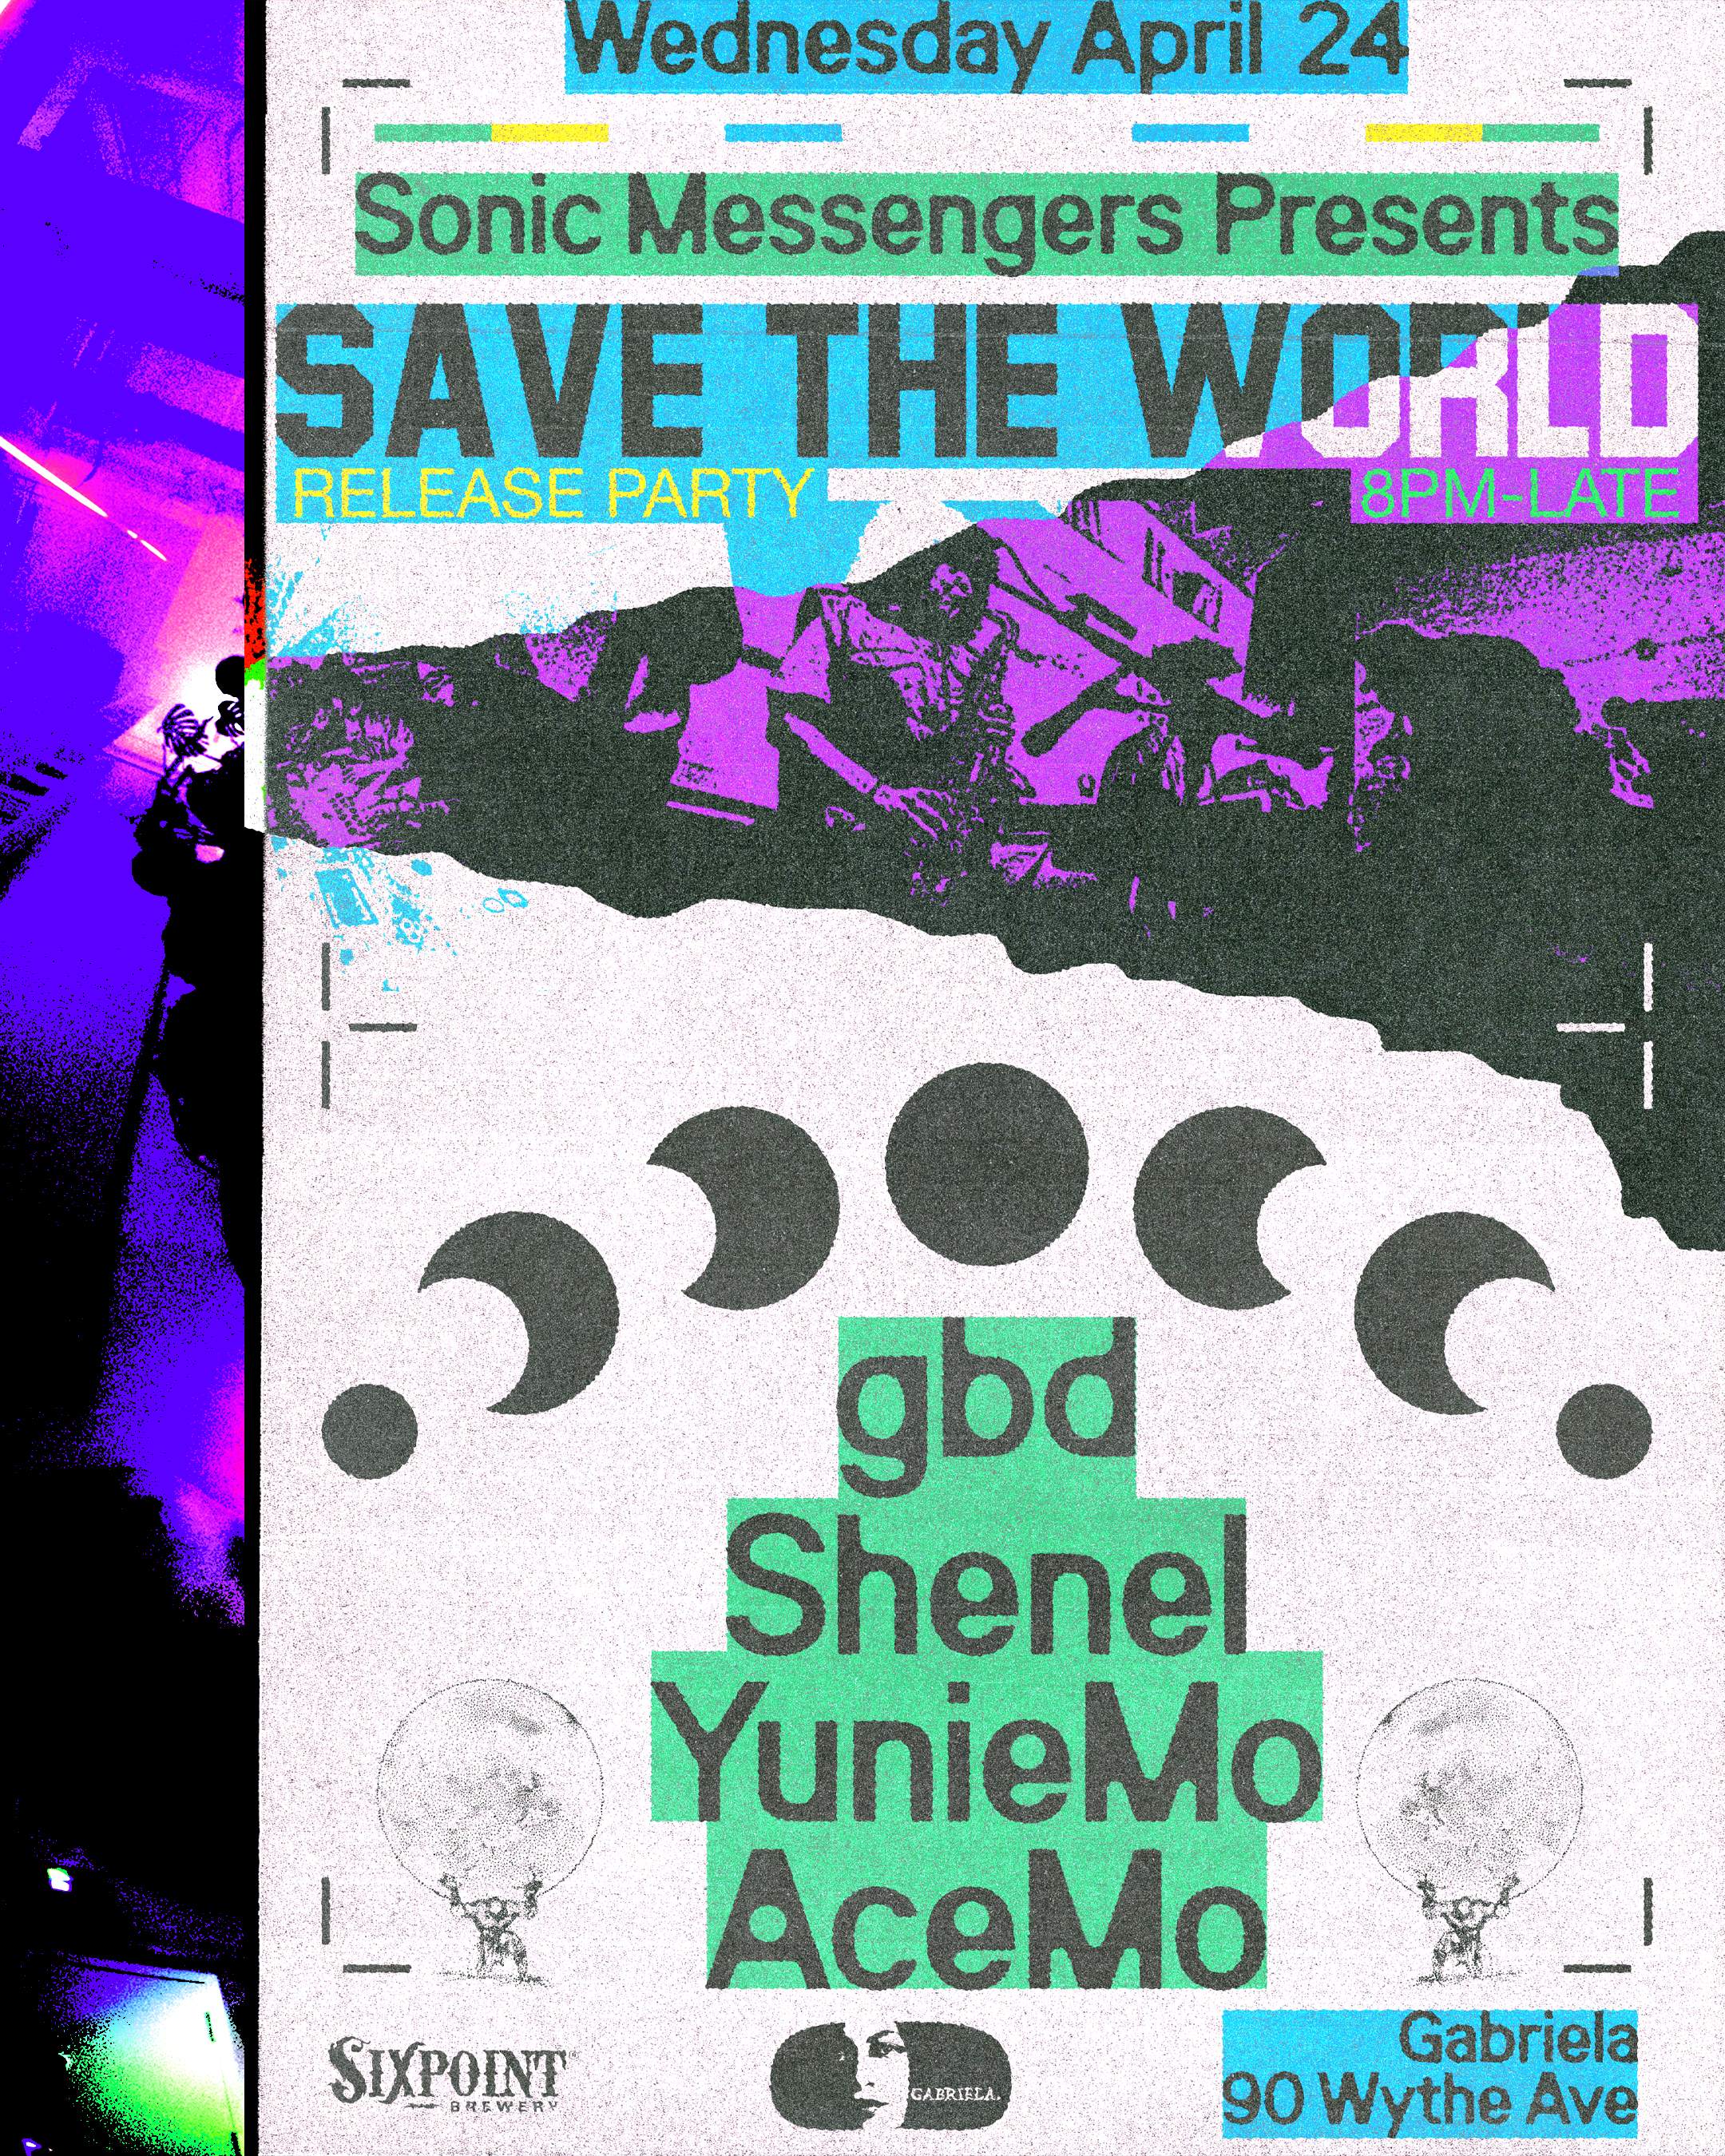 SAVE THE WORLD // AceMo release party w SONIC MESSENGERS - Página frontal